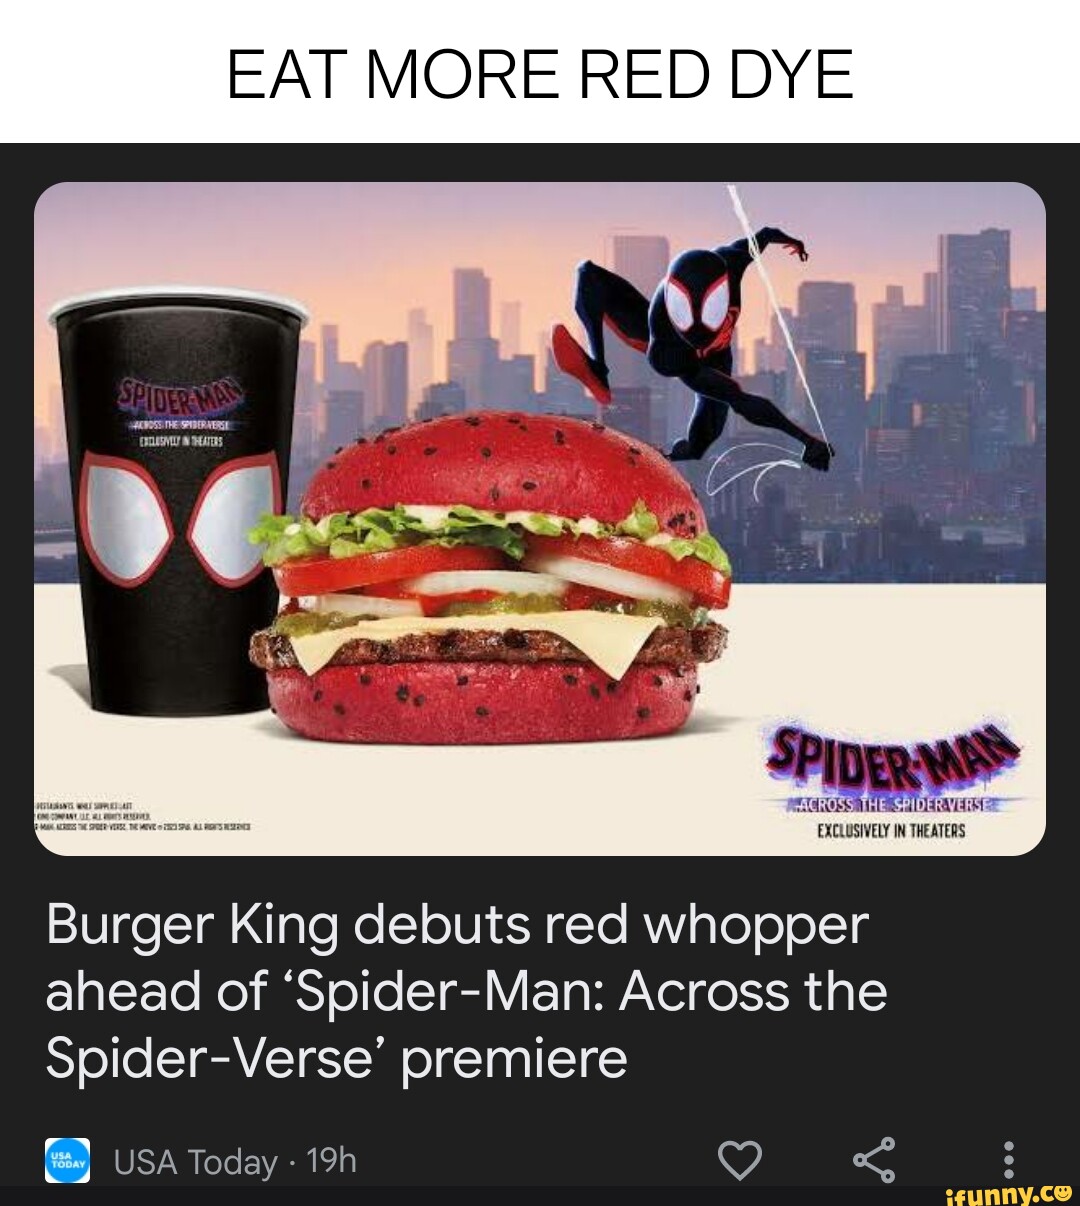 EAT MORE RED DYE ACROSS. THE SPIDER EXCLUSIVELY IN THEATERS Burger King  debuts red whopper ahead of 'Spider-Man: Across the Spider-Verse' premiere  I US Today - iFunny